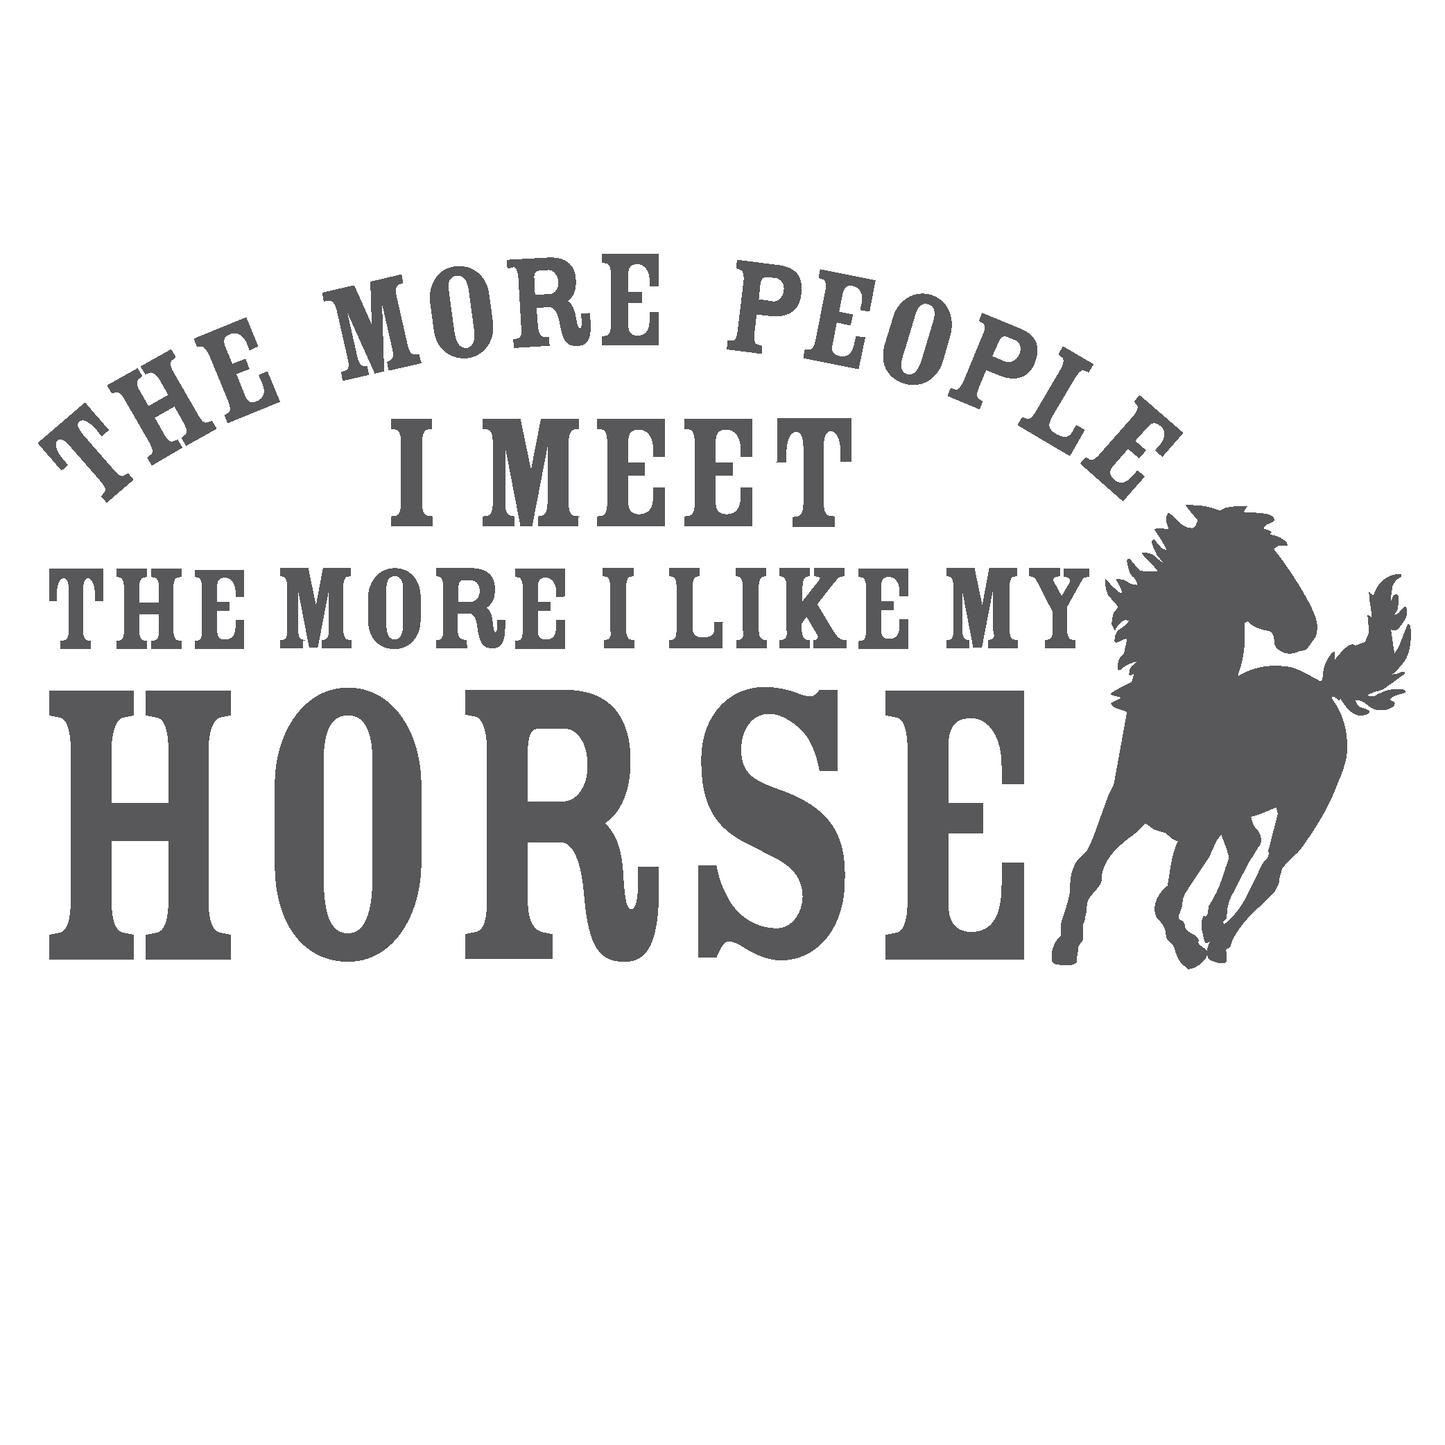 ShopVinylDesignStore.com The More People I Meet The More I Like My Horse Wide Shop Vinyl Design decals stickers